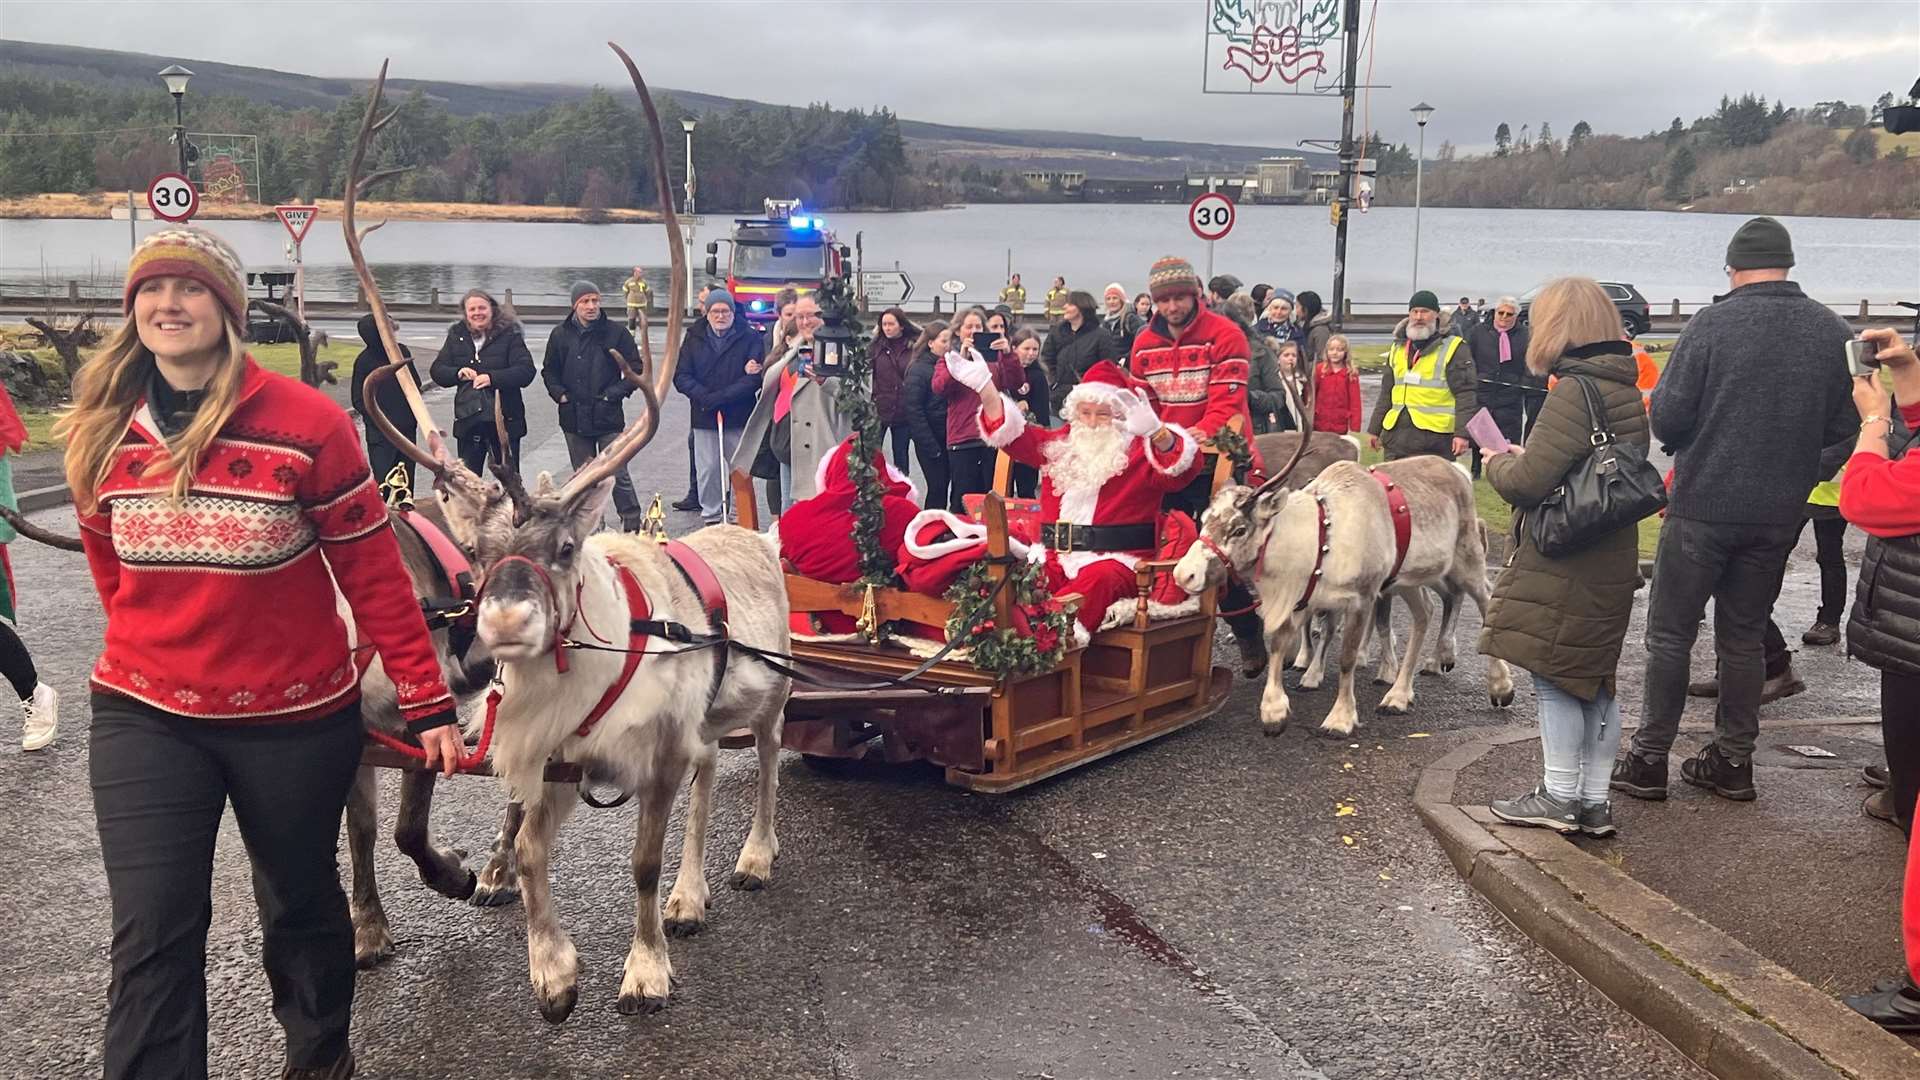 Reindeer from the the Cairngorm Reindeer Centre in Aviemore pulled Santa in his sleigh at Lairg's Winterfest on Saturday.